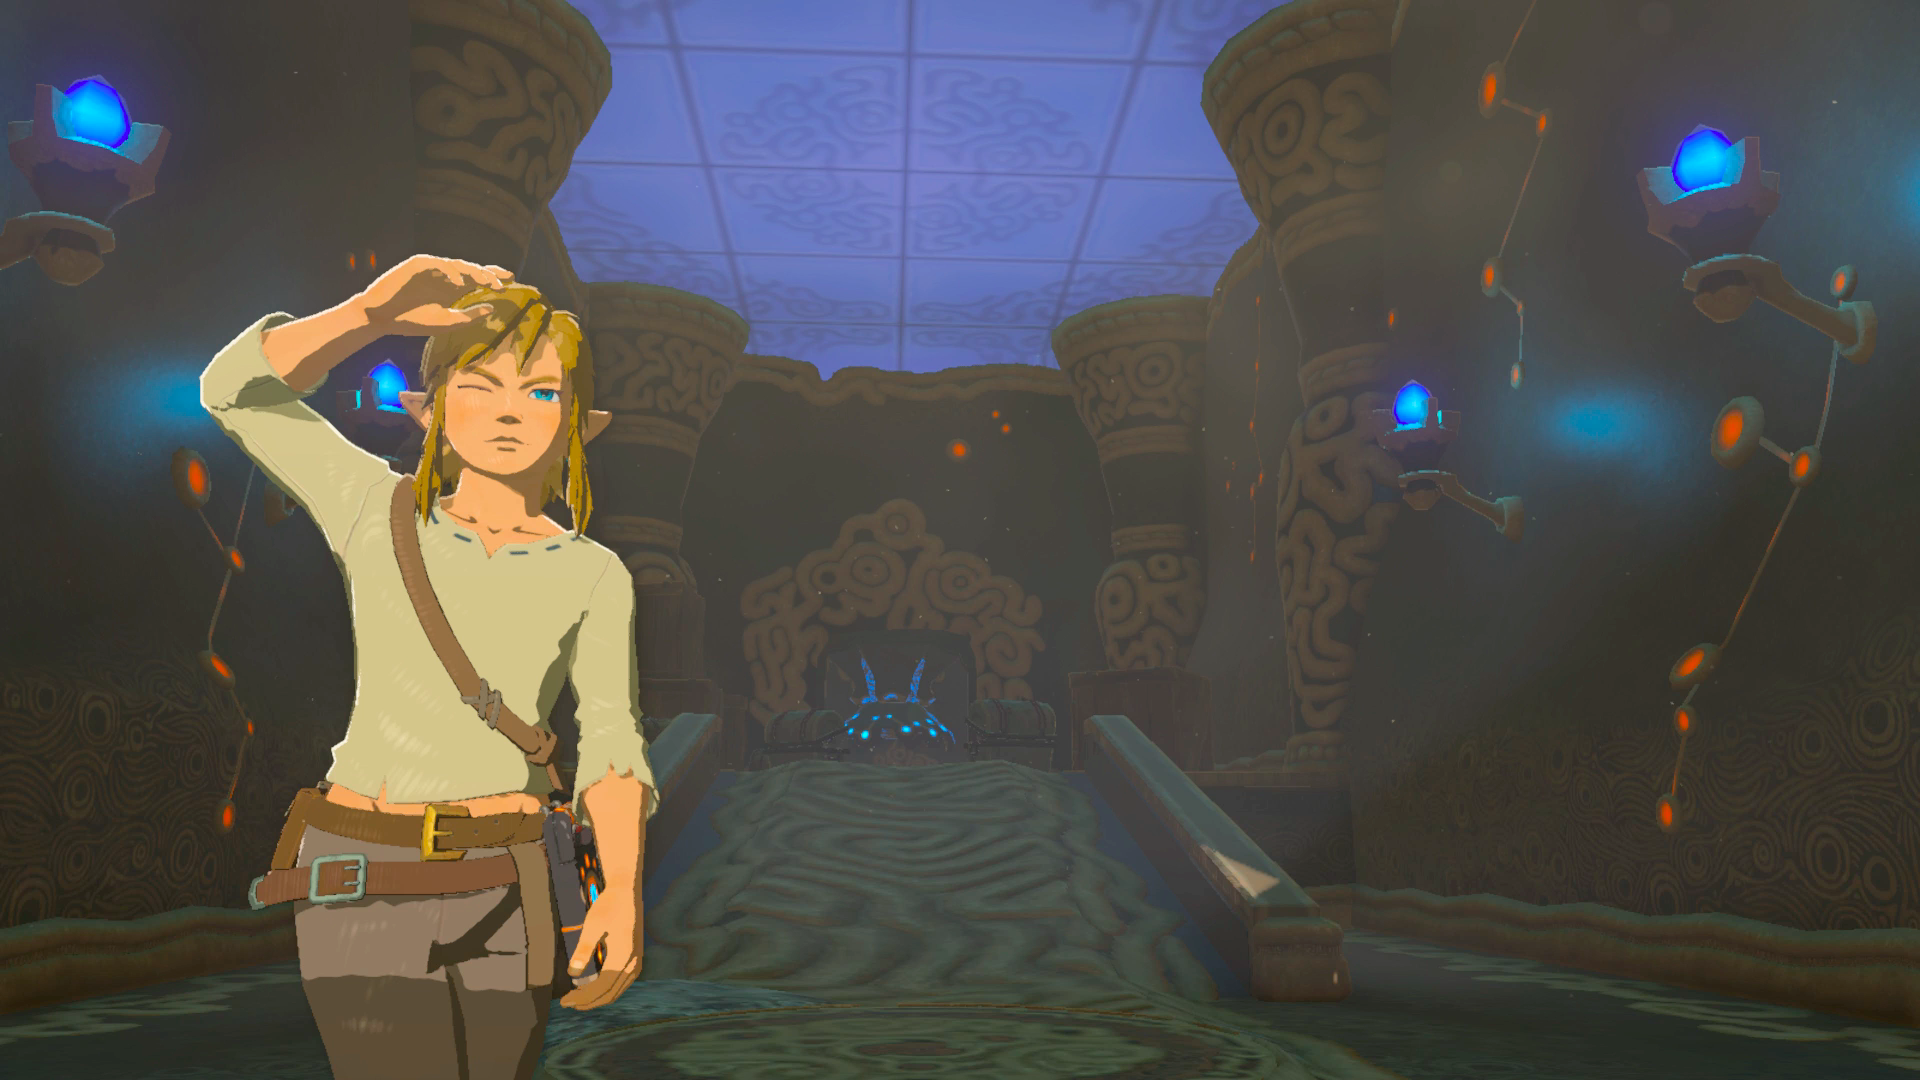 The Legend of Zelda: Breath of the Wild Review: An Beautifully Designed RPG  for the Switch